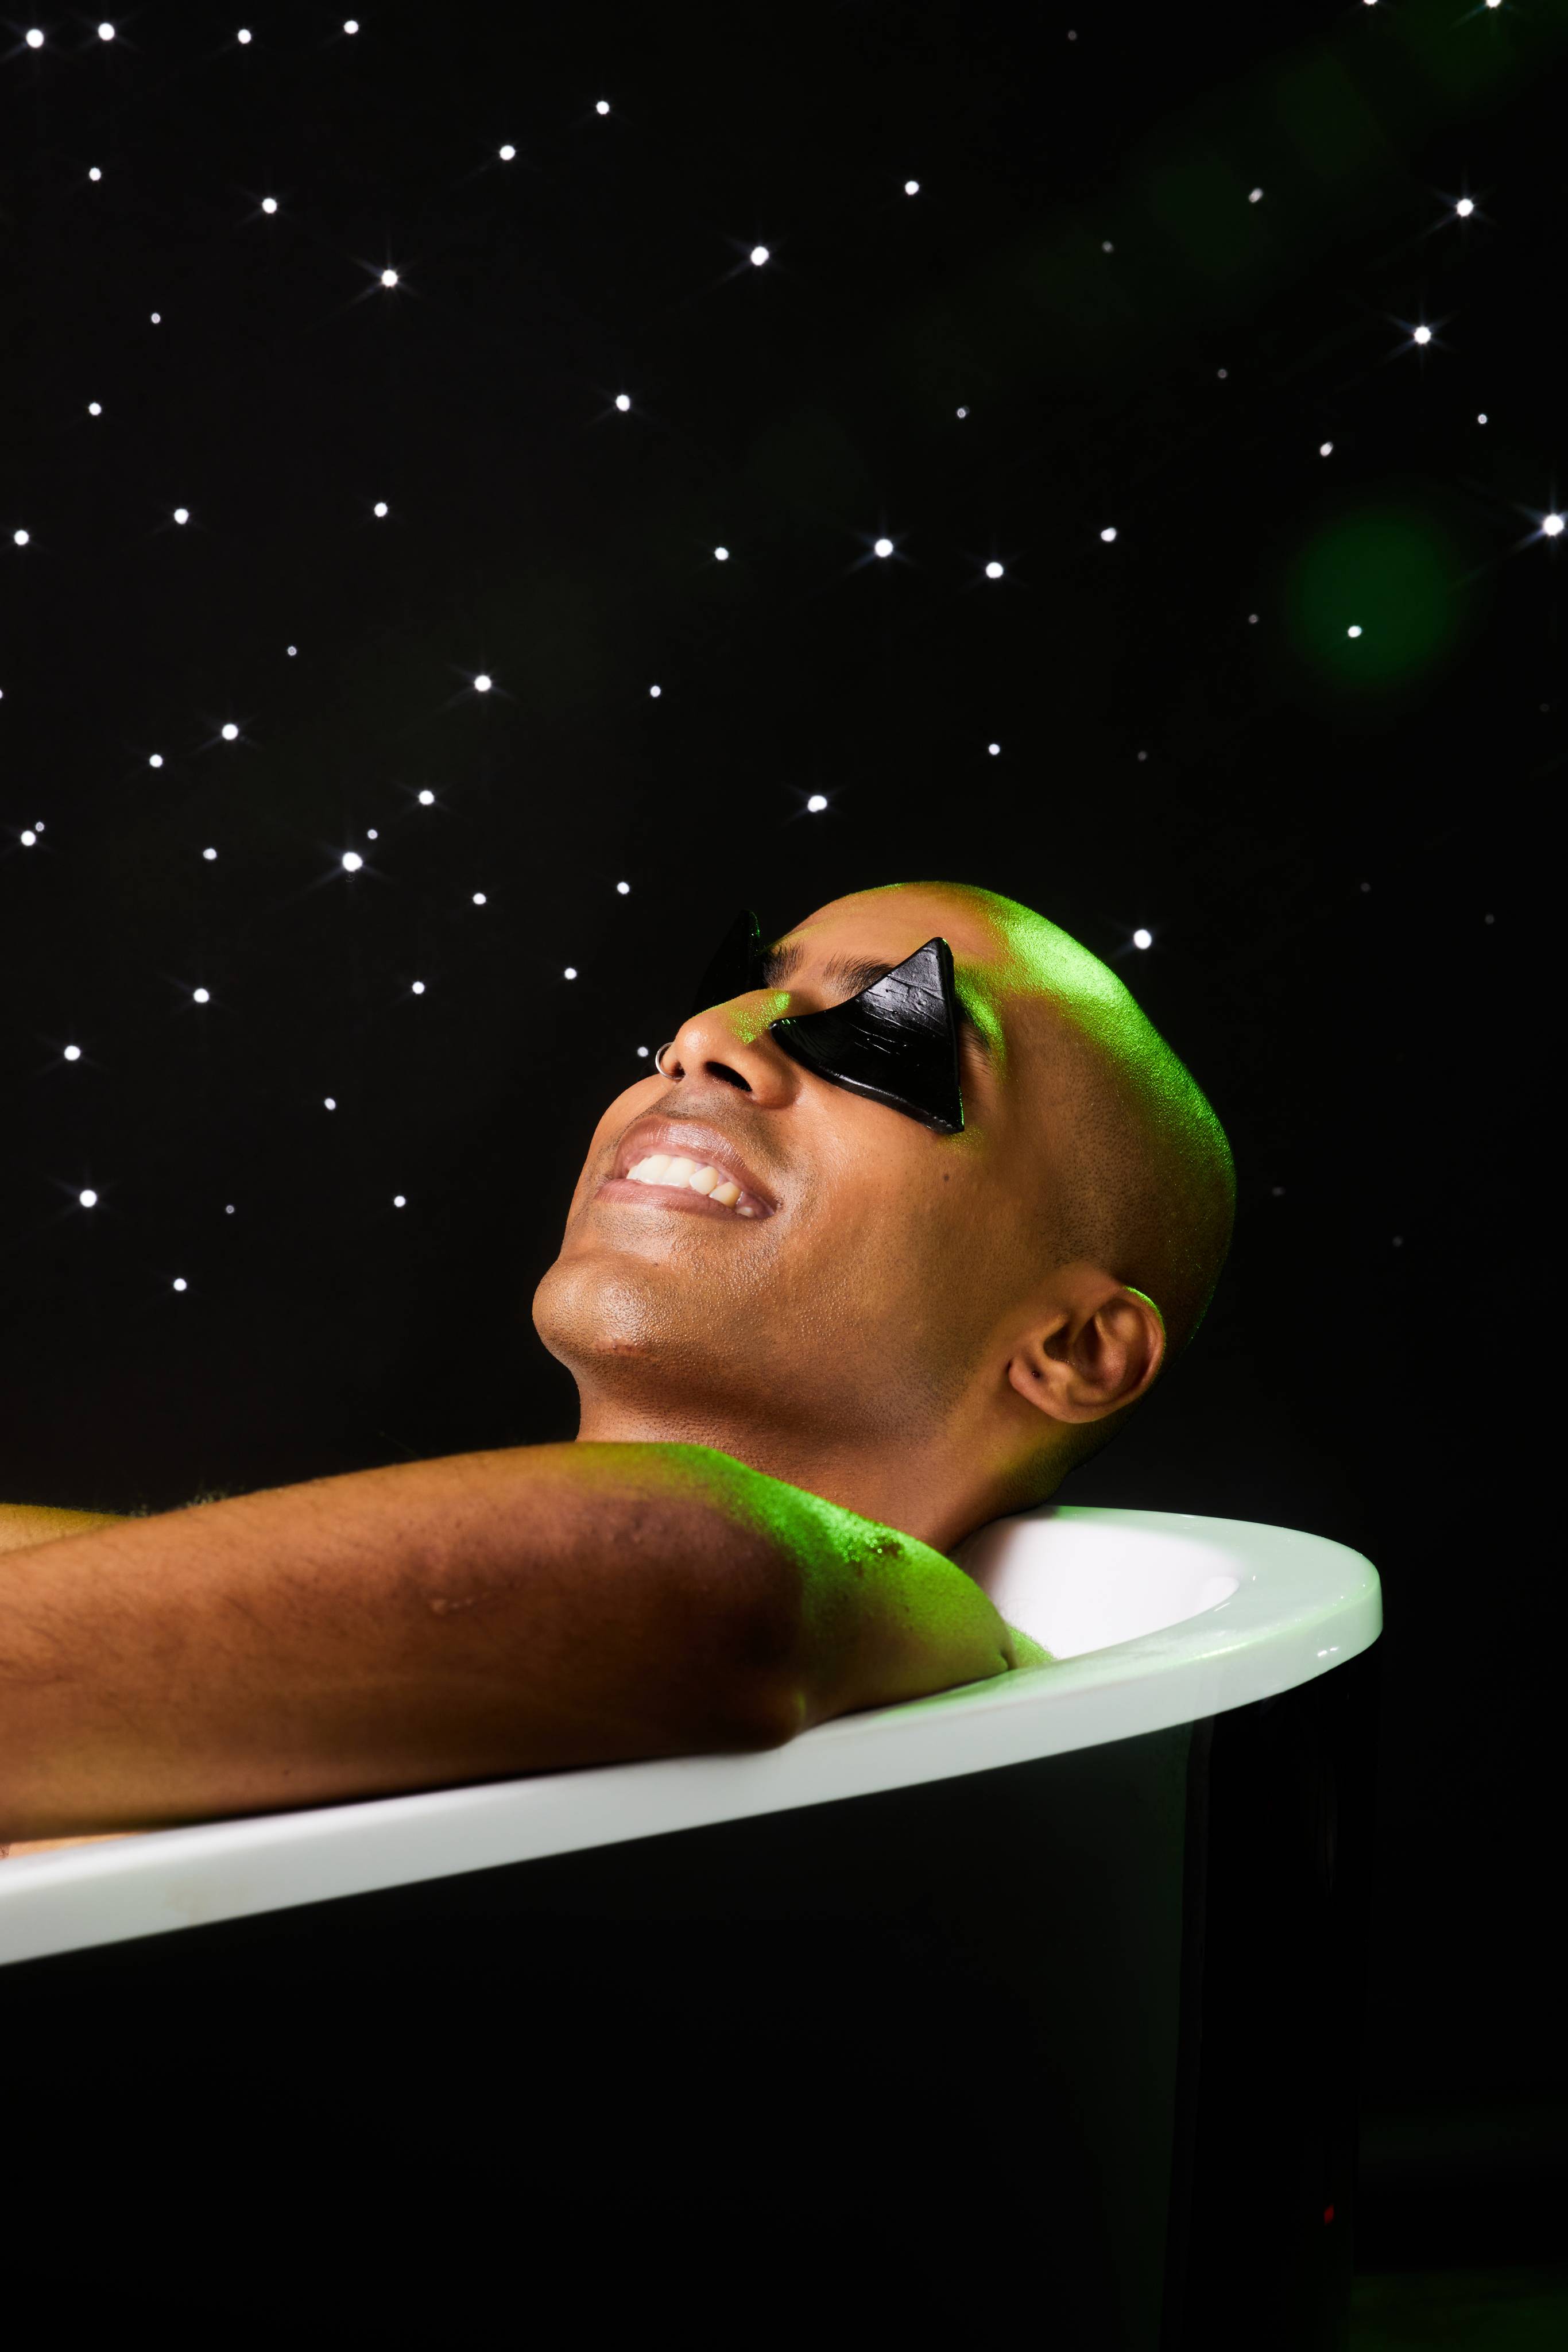 Image shows the model laid back in the bath, relaxing, with the Pumpkin Eye Pads in place on a black, twinkling background.